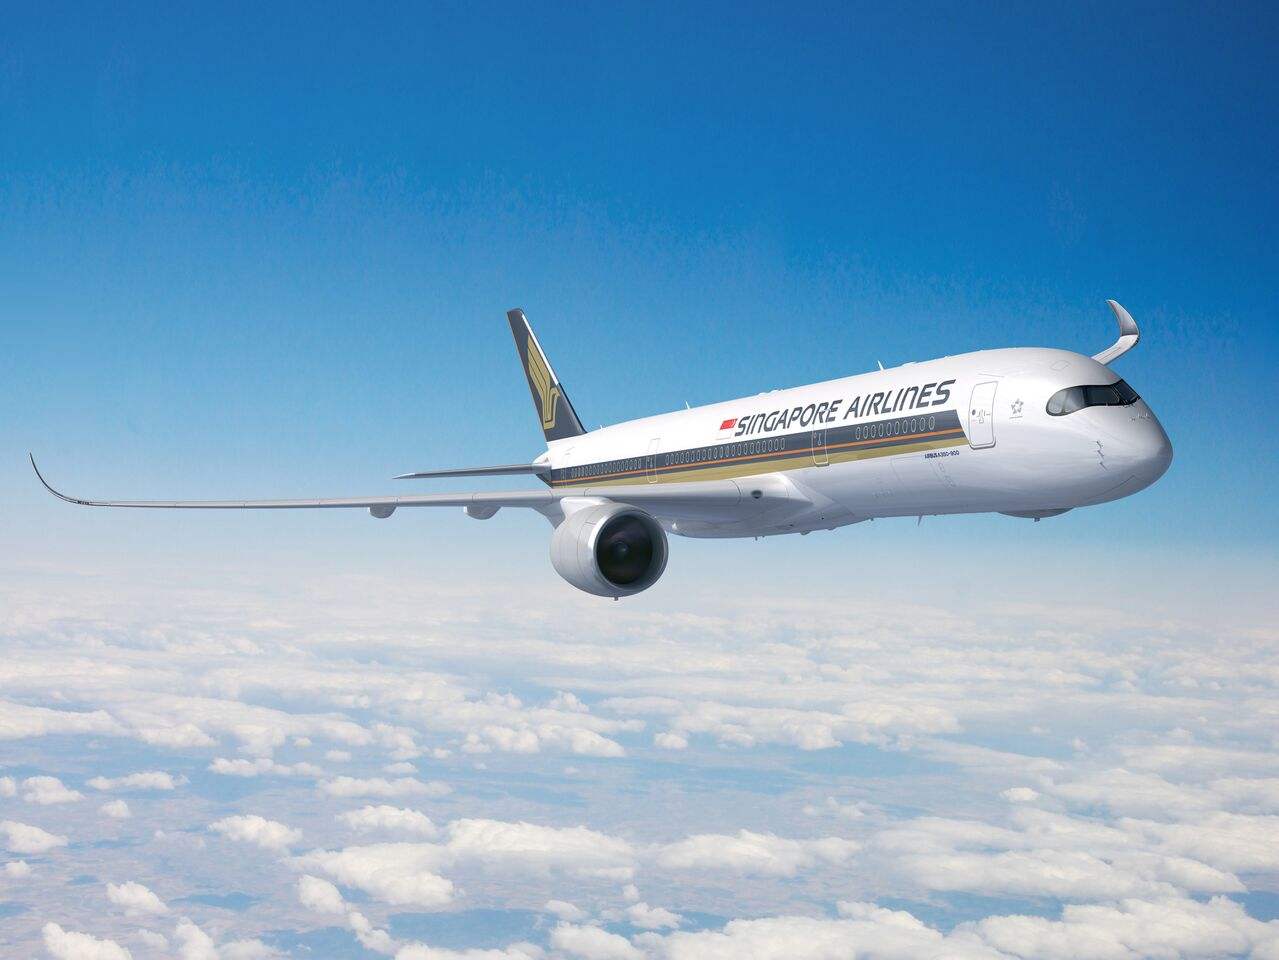 Singapore Airlines re-launches ultra-long-range flights